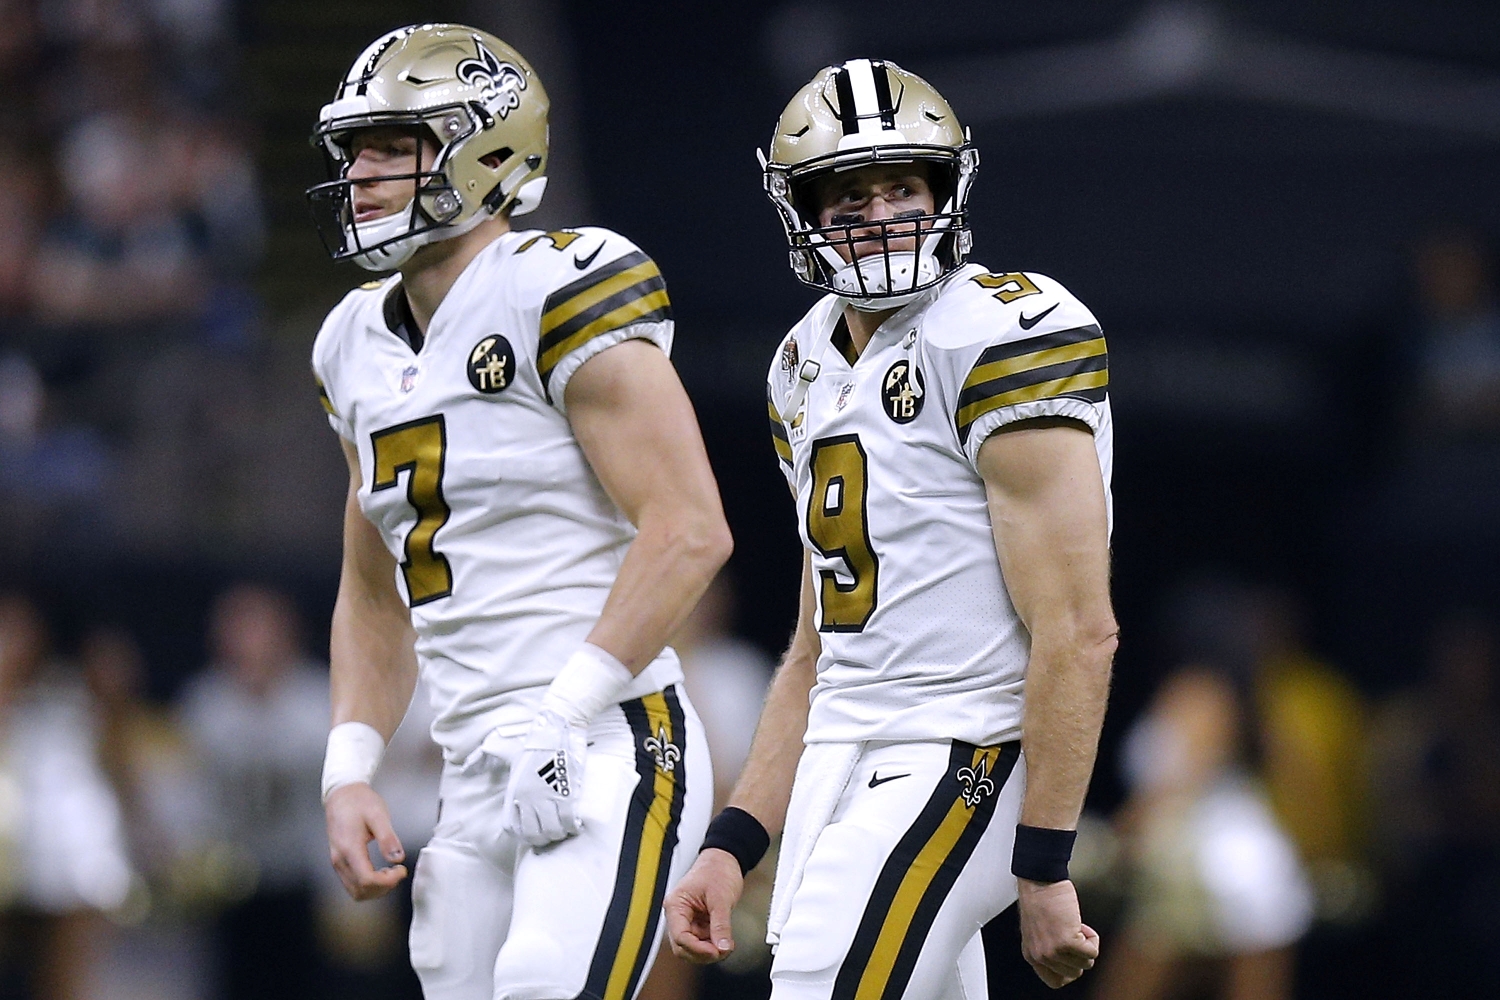 Drew Brees just made Saints fans' worst nightmare come true, as the legendary QB will go on injured reserve. That puts Taysom Hill in the spotlight to be the team's starting quarterback moving forward.